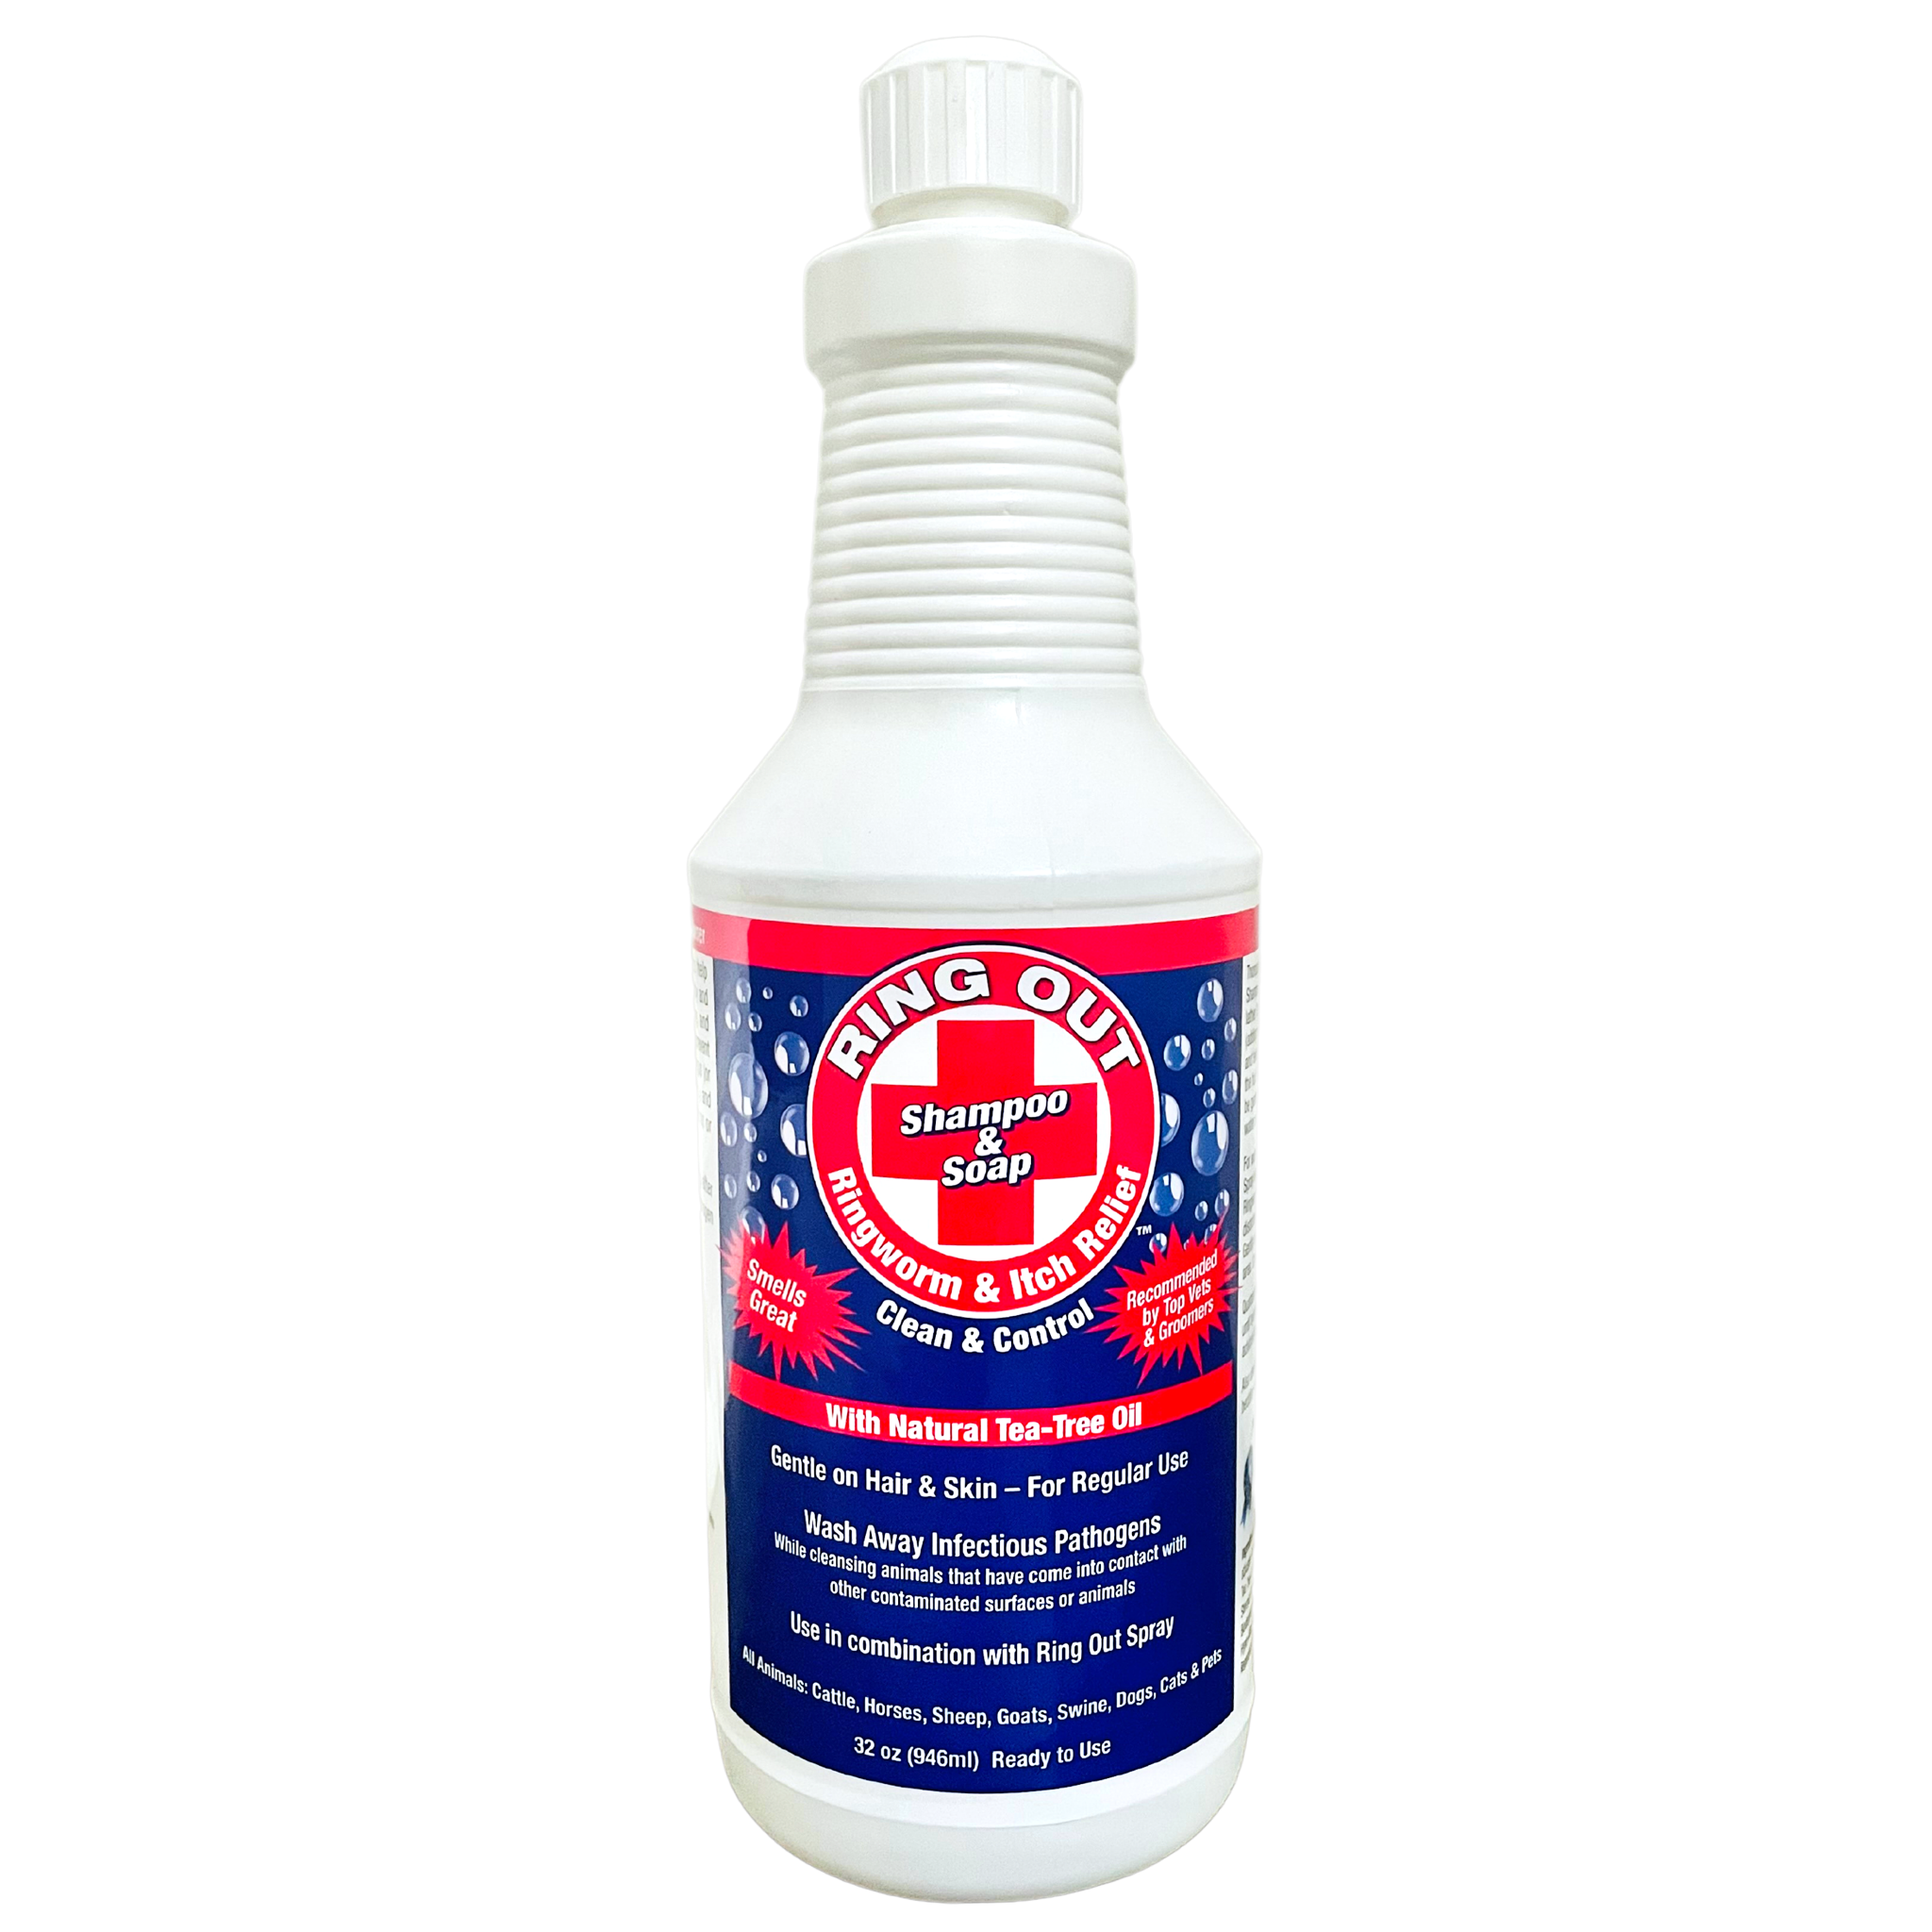 Ringworm Prevention Pack - Ring Out, Ring Out Shampoo, Sprayer - Prevent & Help Treat Ringworm & Fungus